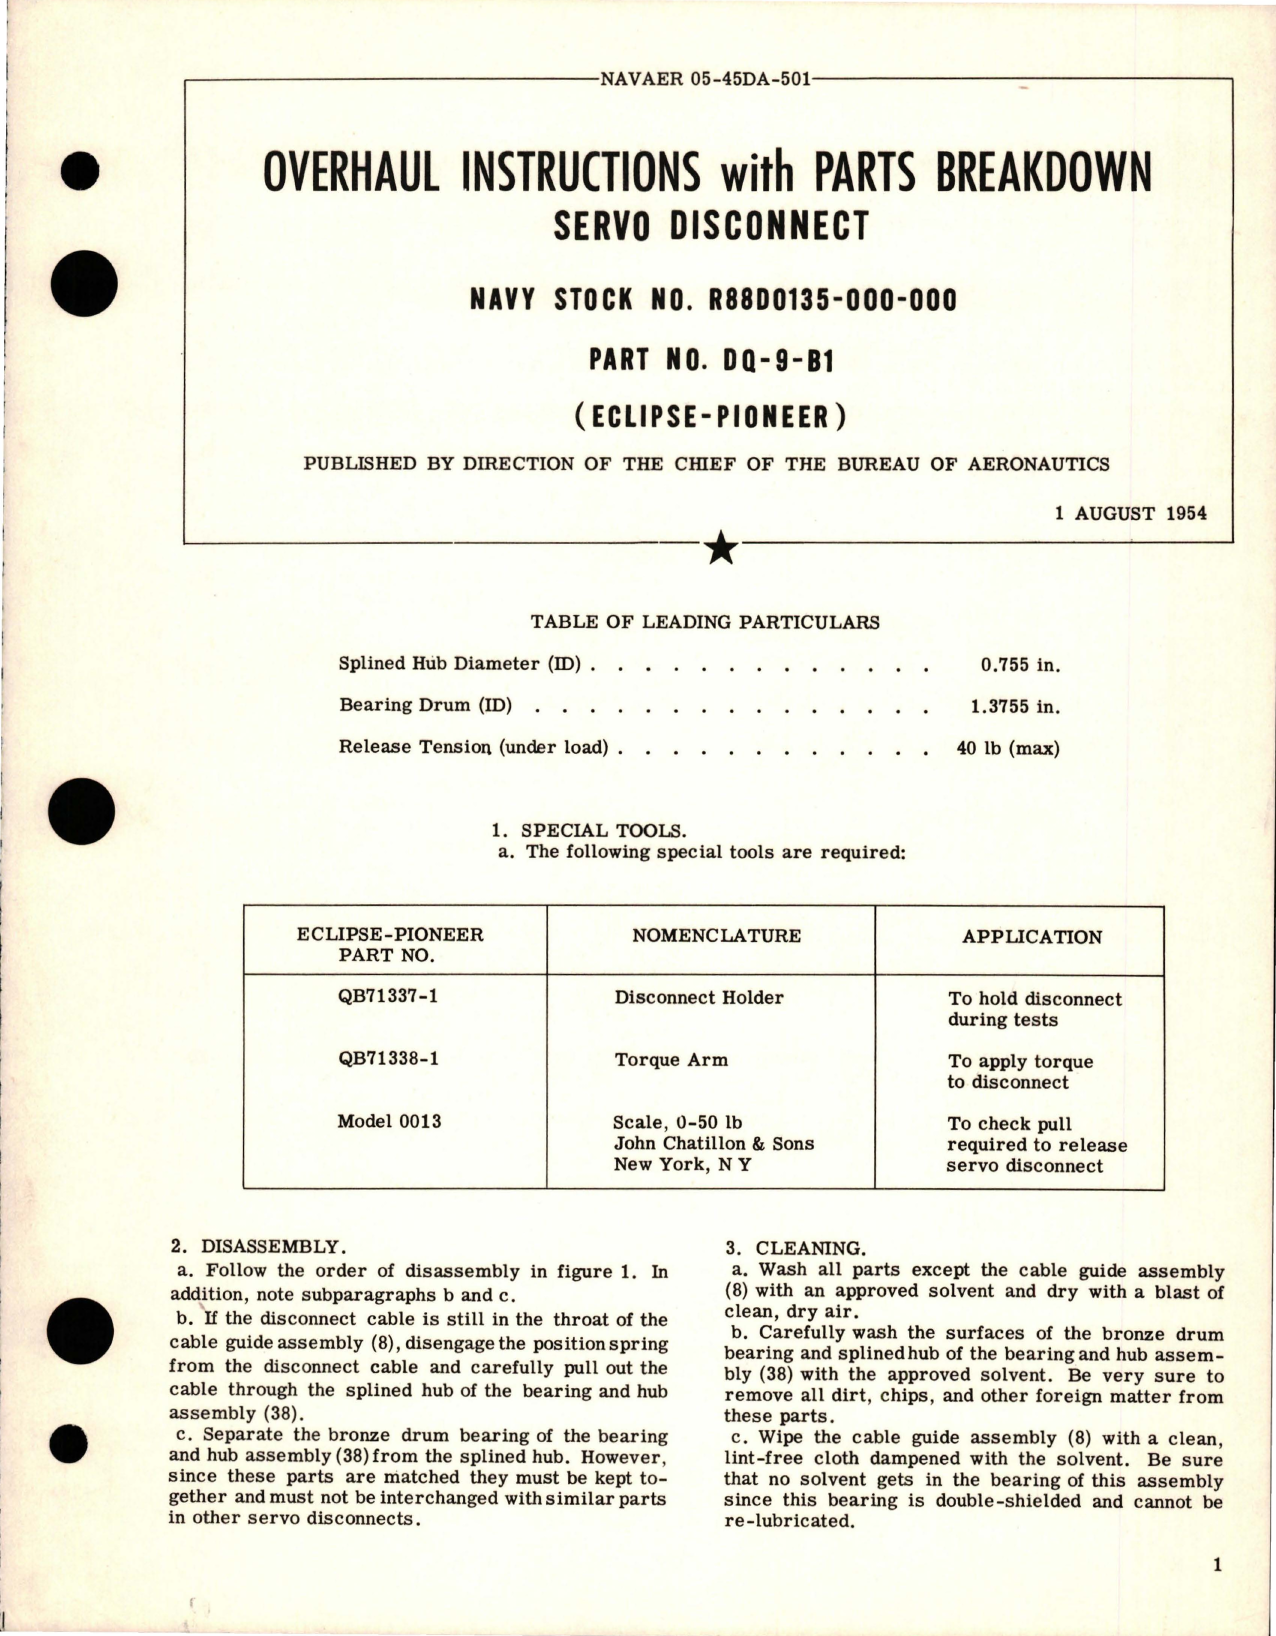 Sample page 1 from AirCorps Library document: Overhaul Instructions with Parts Breakdown for Servo Disconnect - Part DQ-9-B1